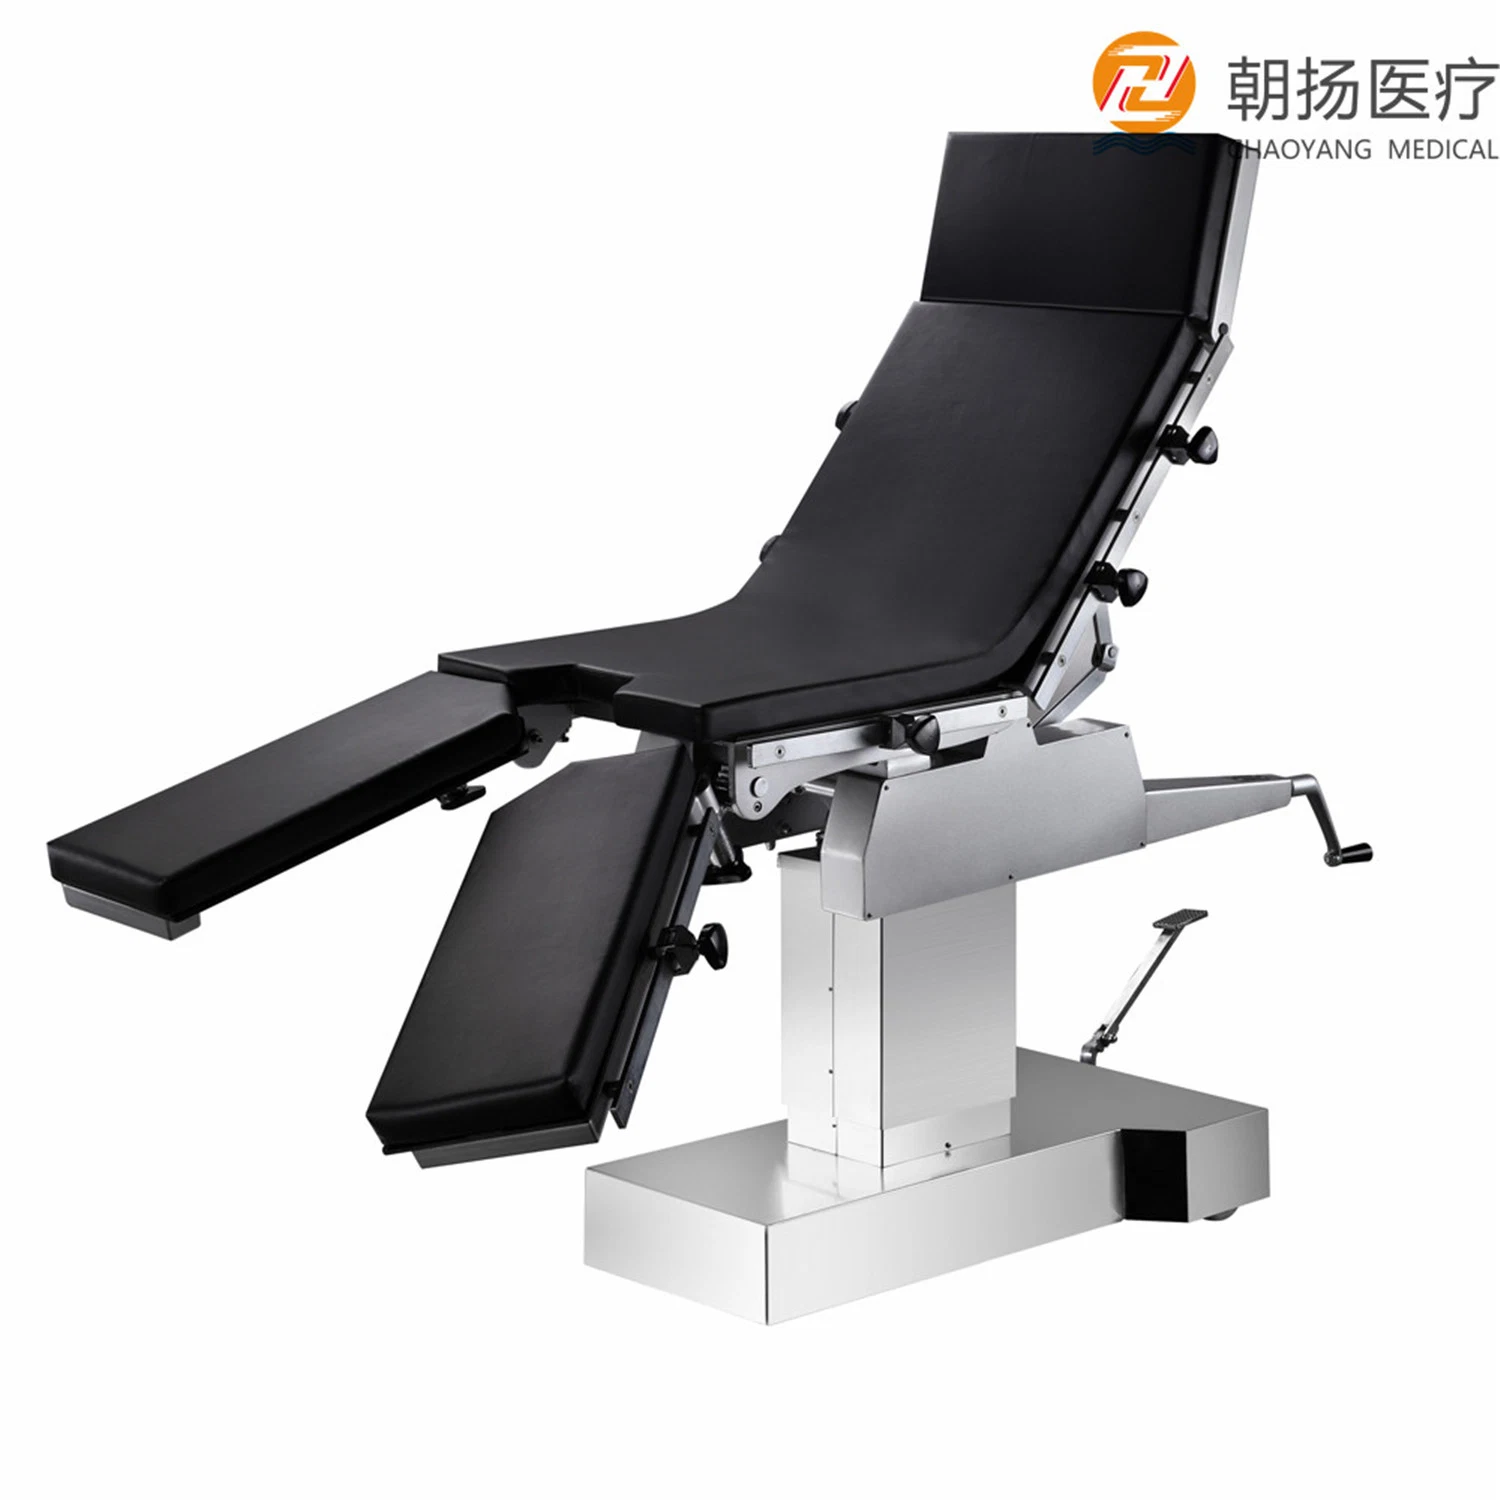 Hospital Medical Equipment Mechanically Medical Surgical Table Orthopaedic Operation Table